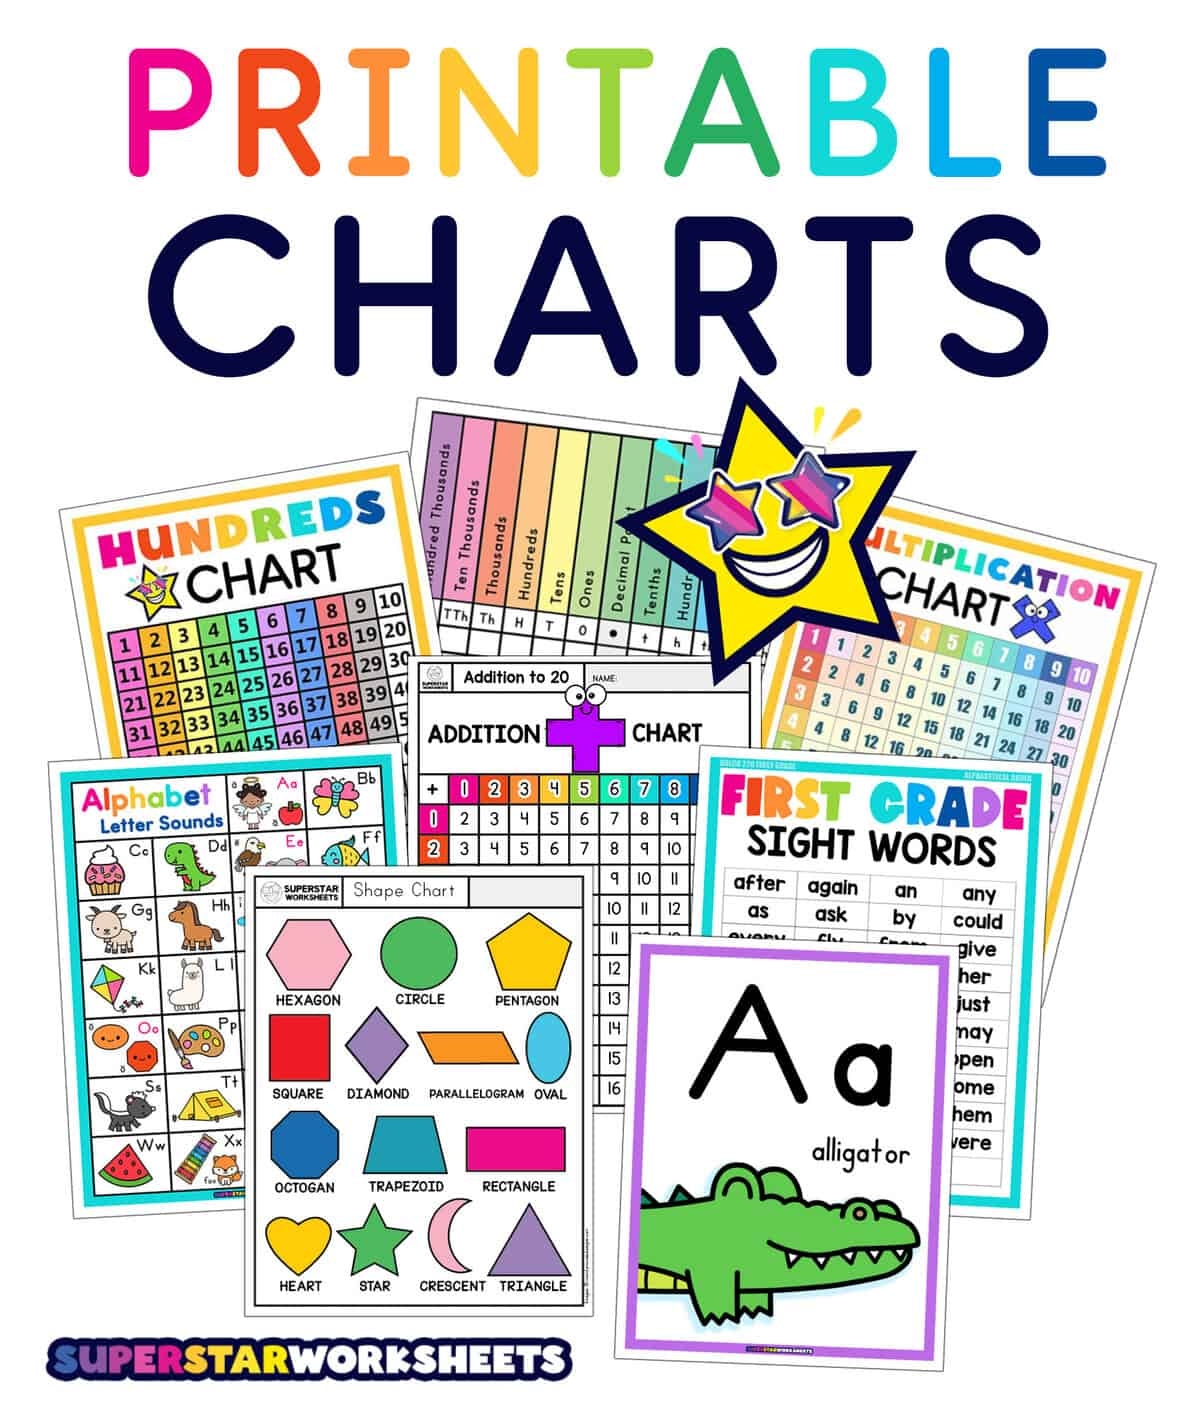 Printable Charts Superstar Worksheets - Free Printable Charts For Teachers